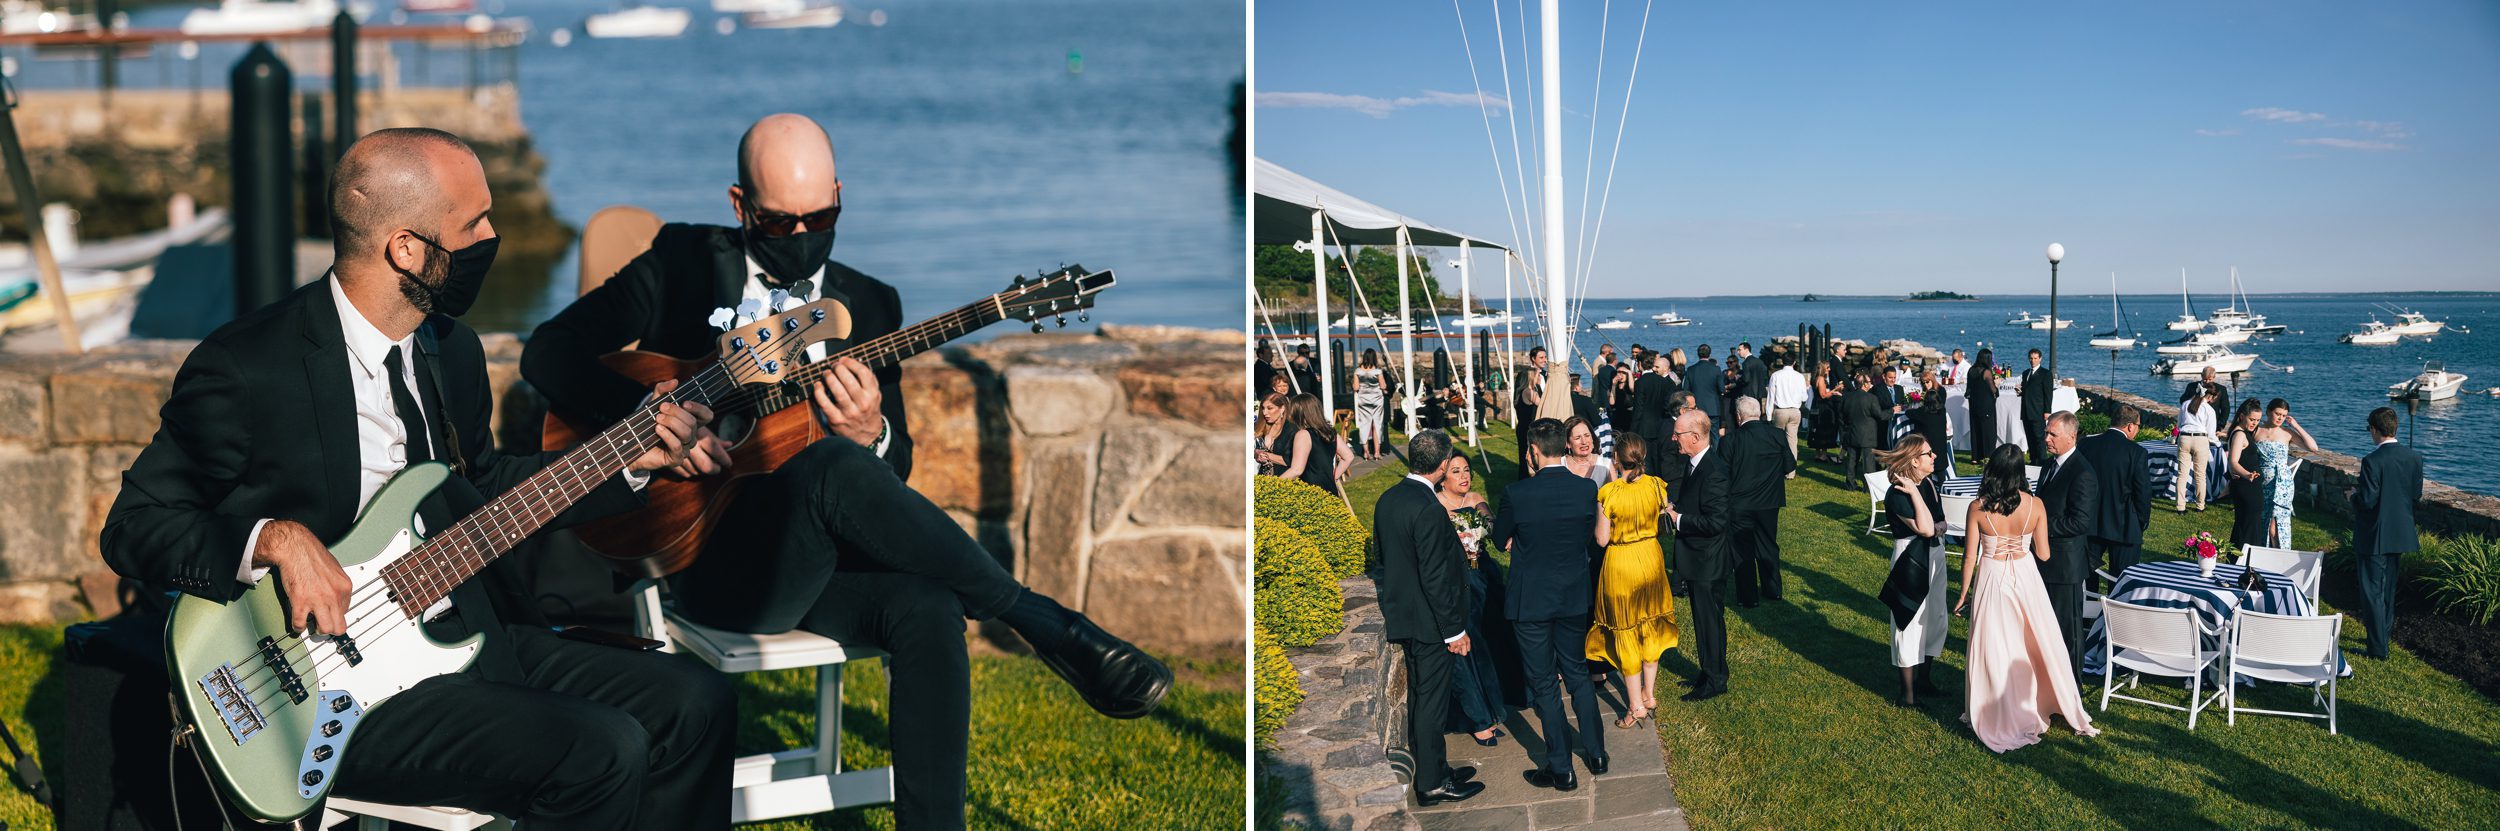 musicians playing outside for wedding guest